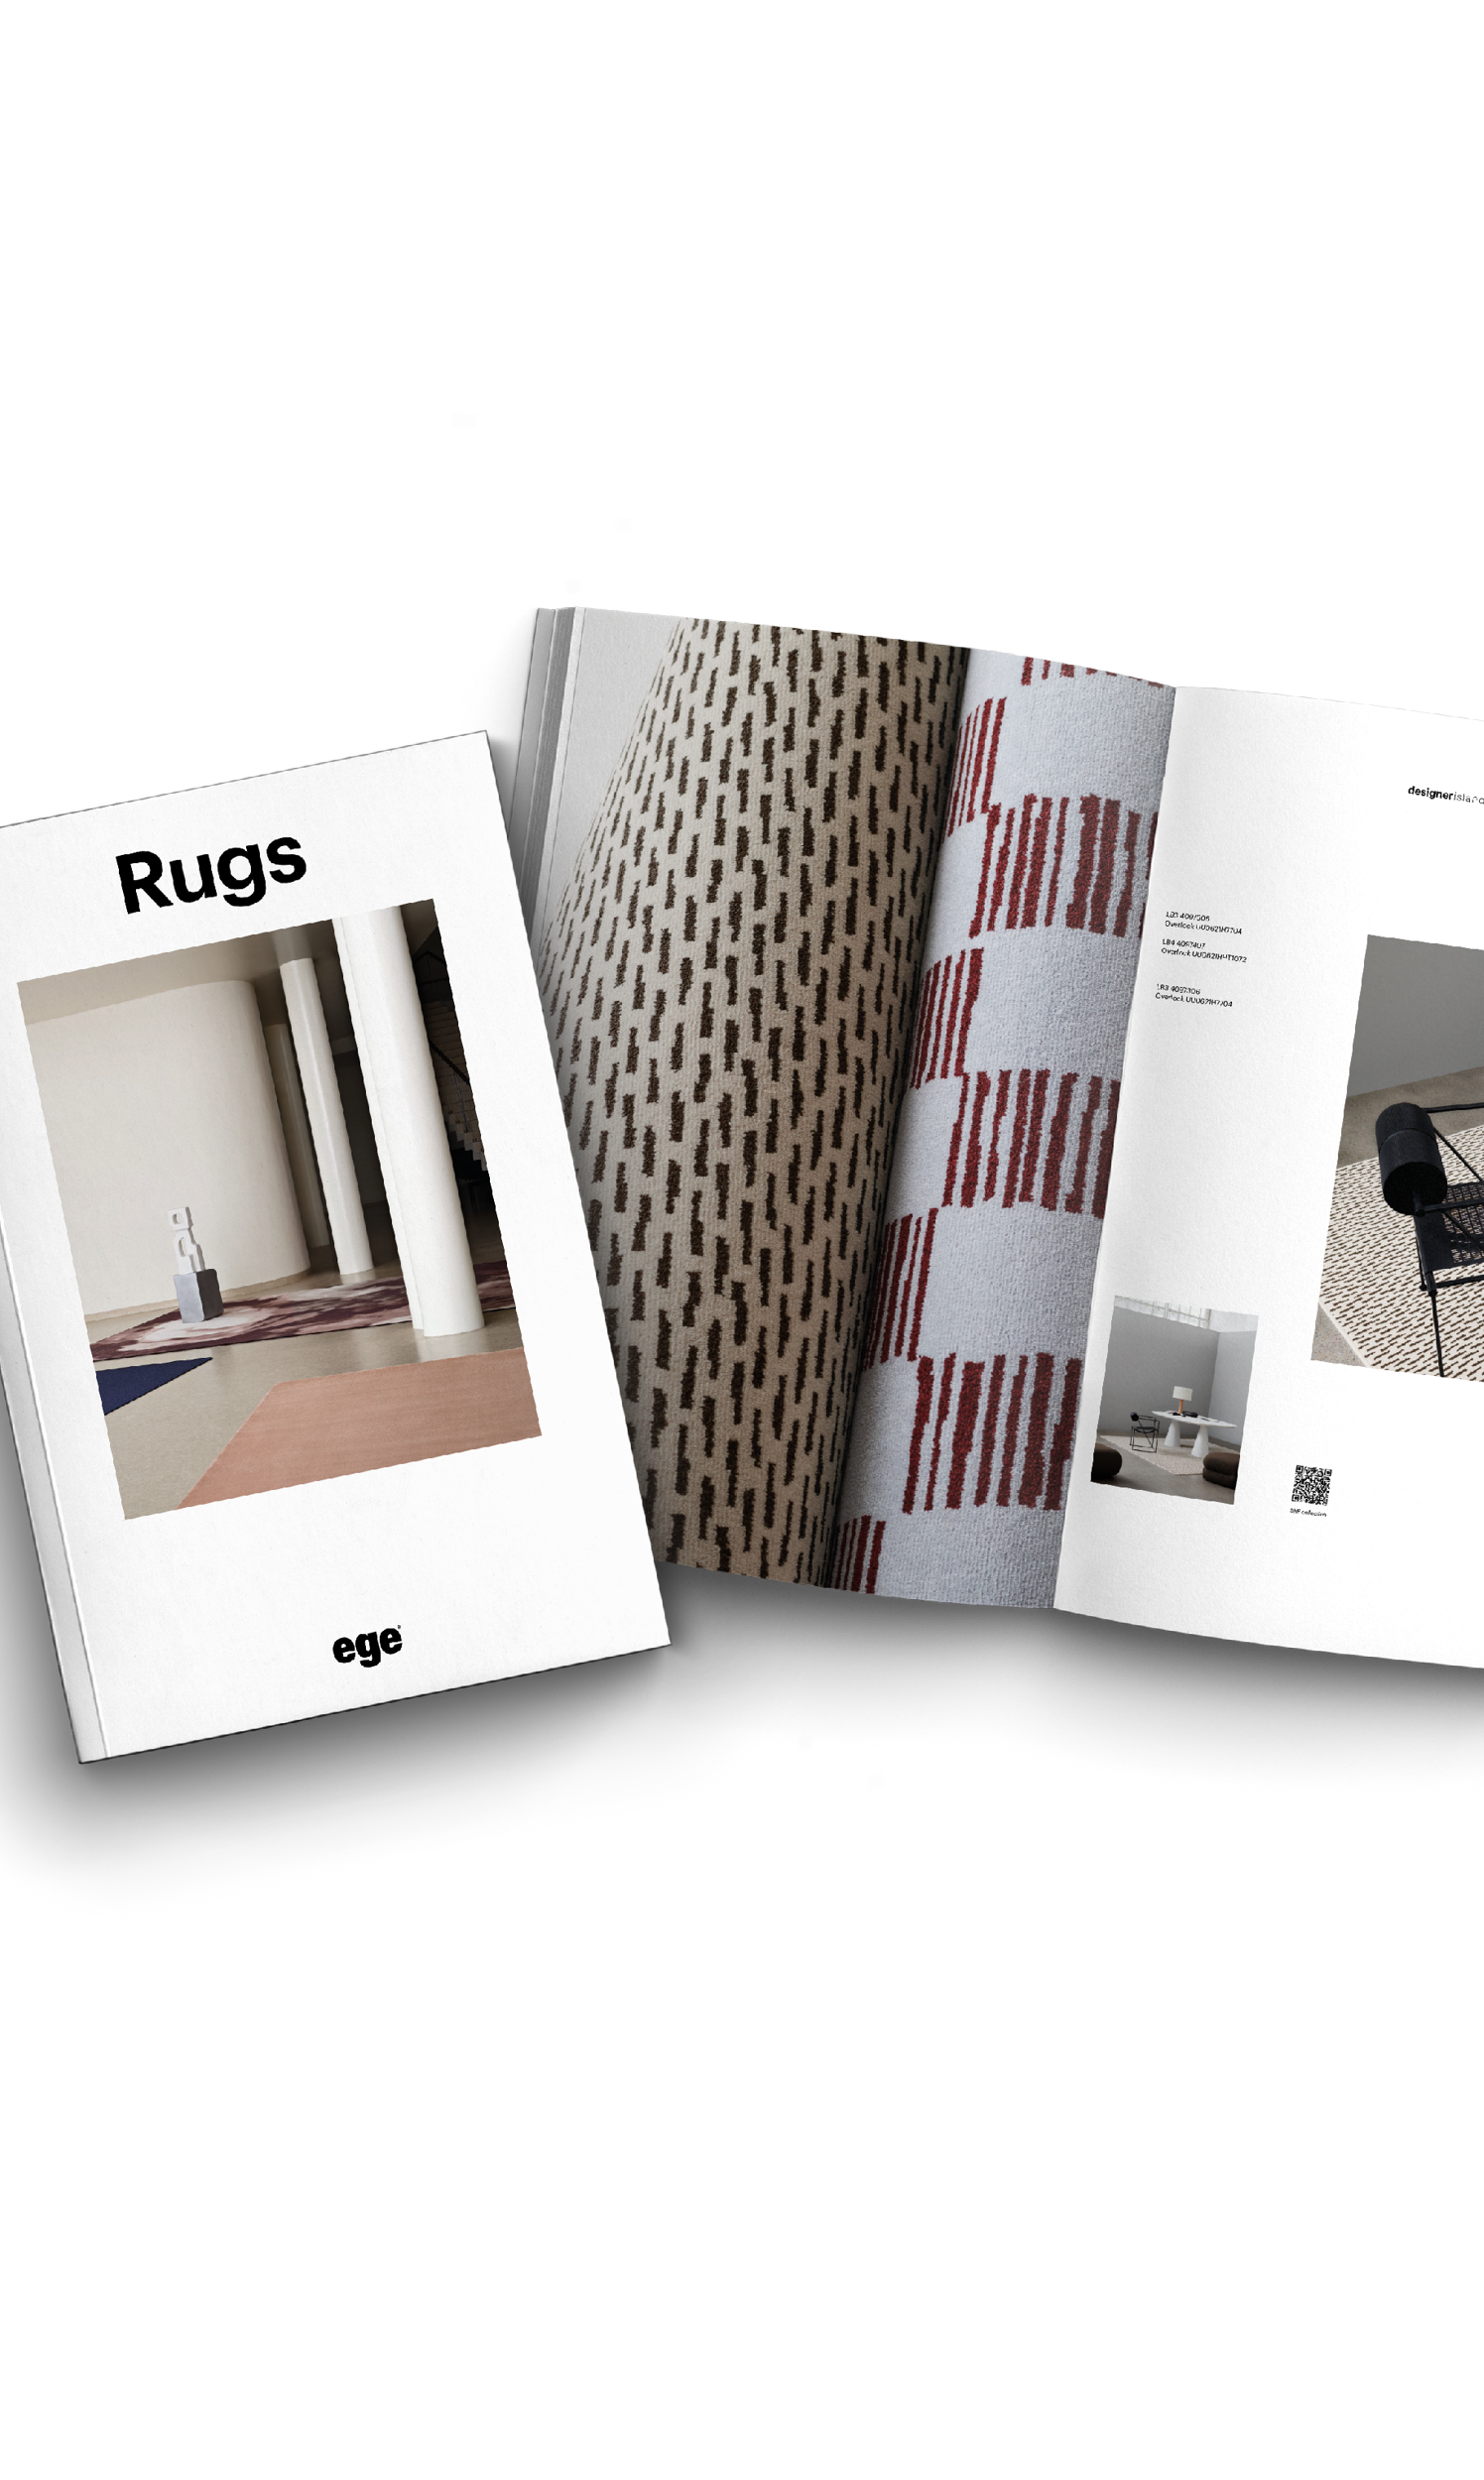 Powerful stories told by rugs